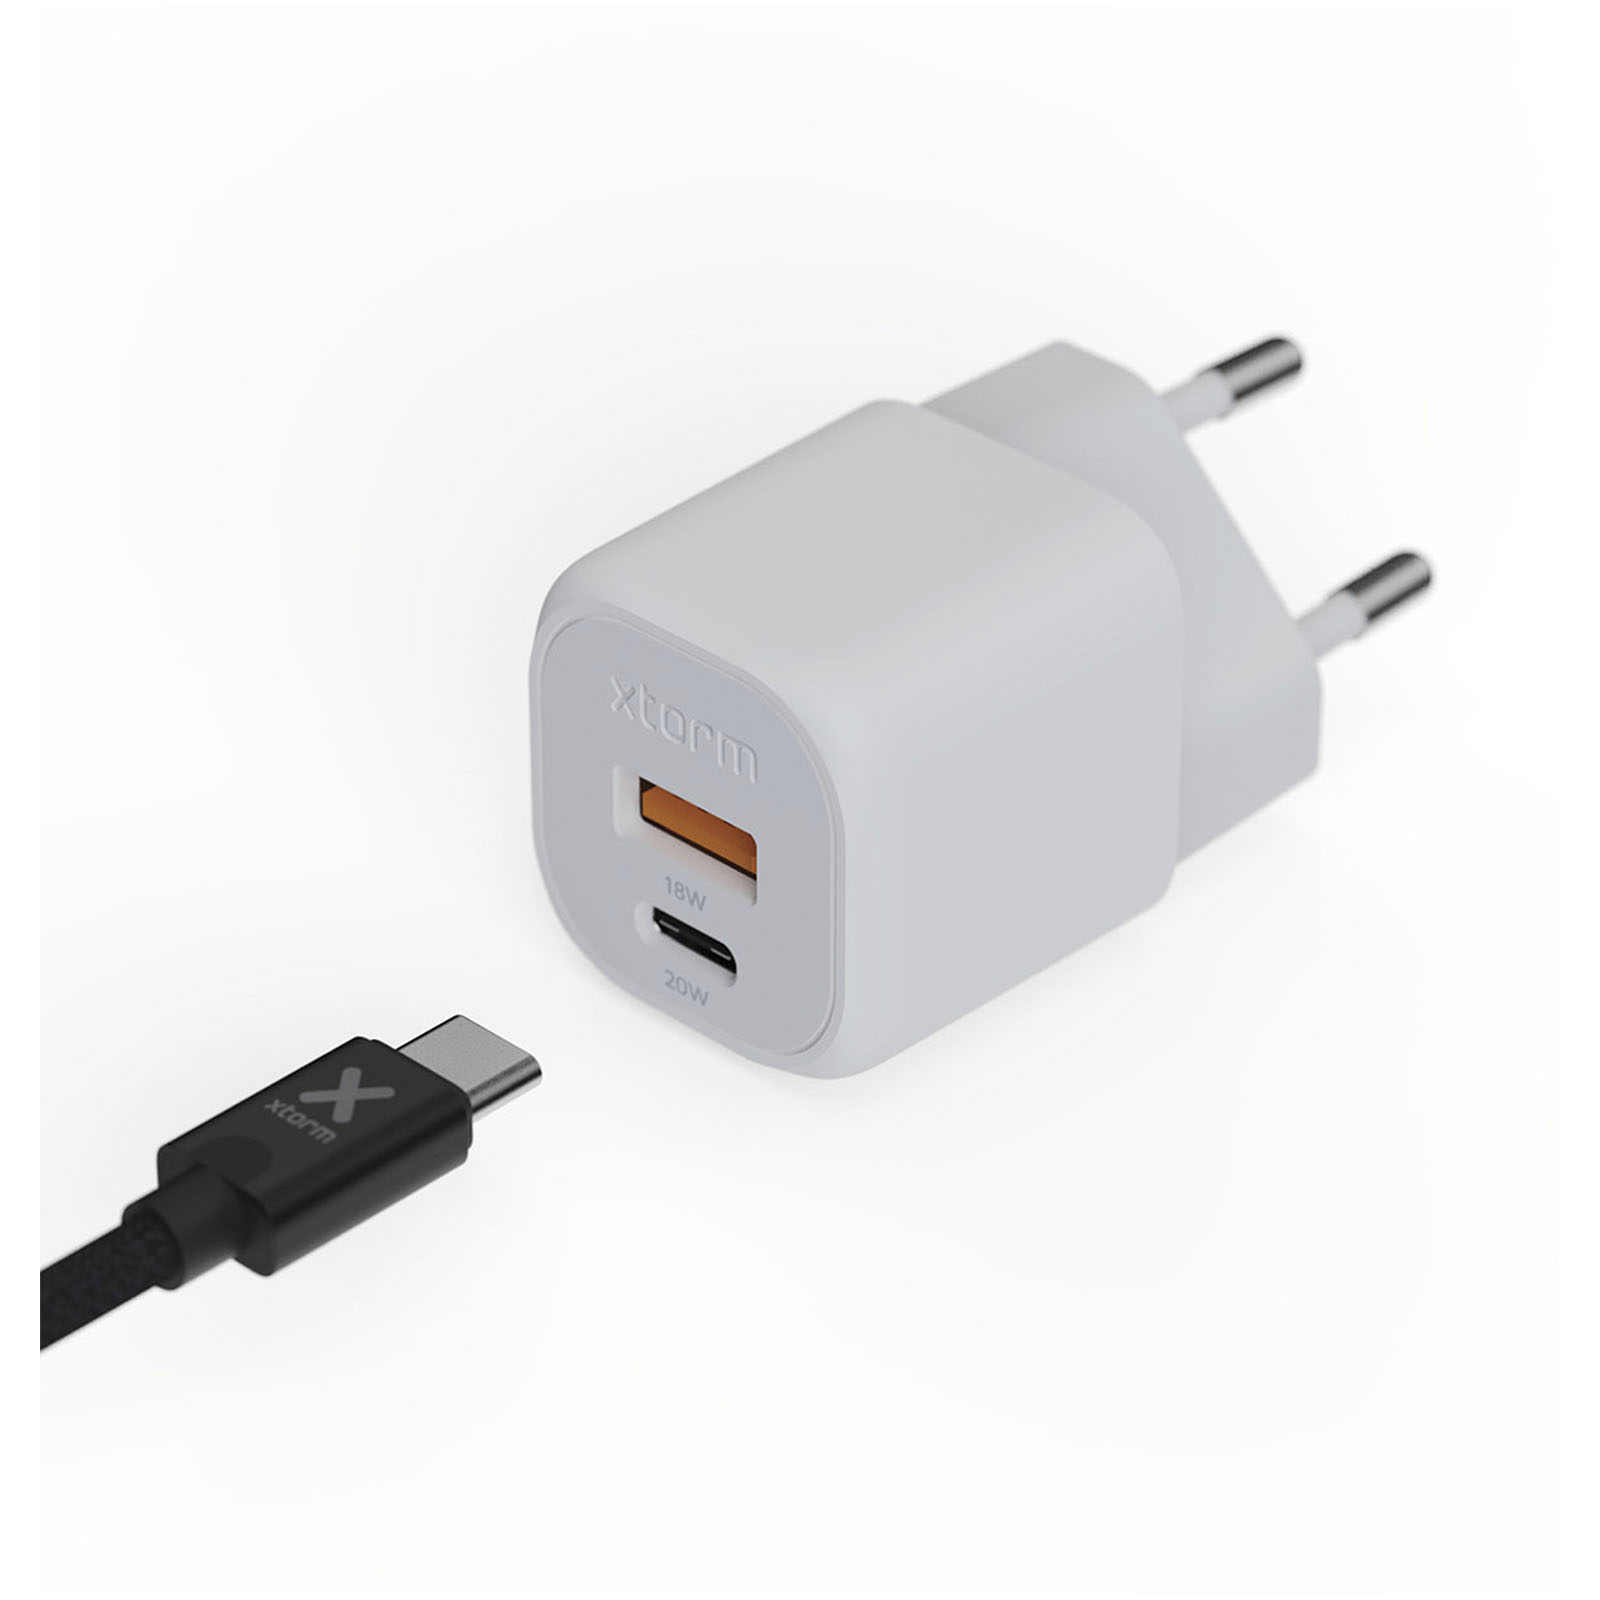 Advertising Chargers - Xtorm XEC020 GaN² Ultra 20W wall charger - 4